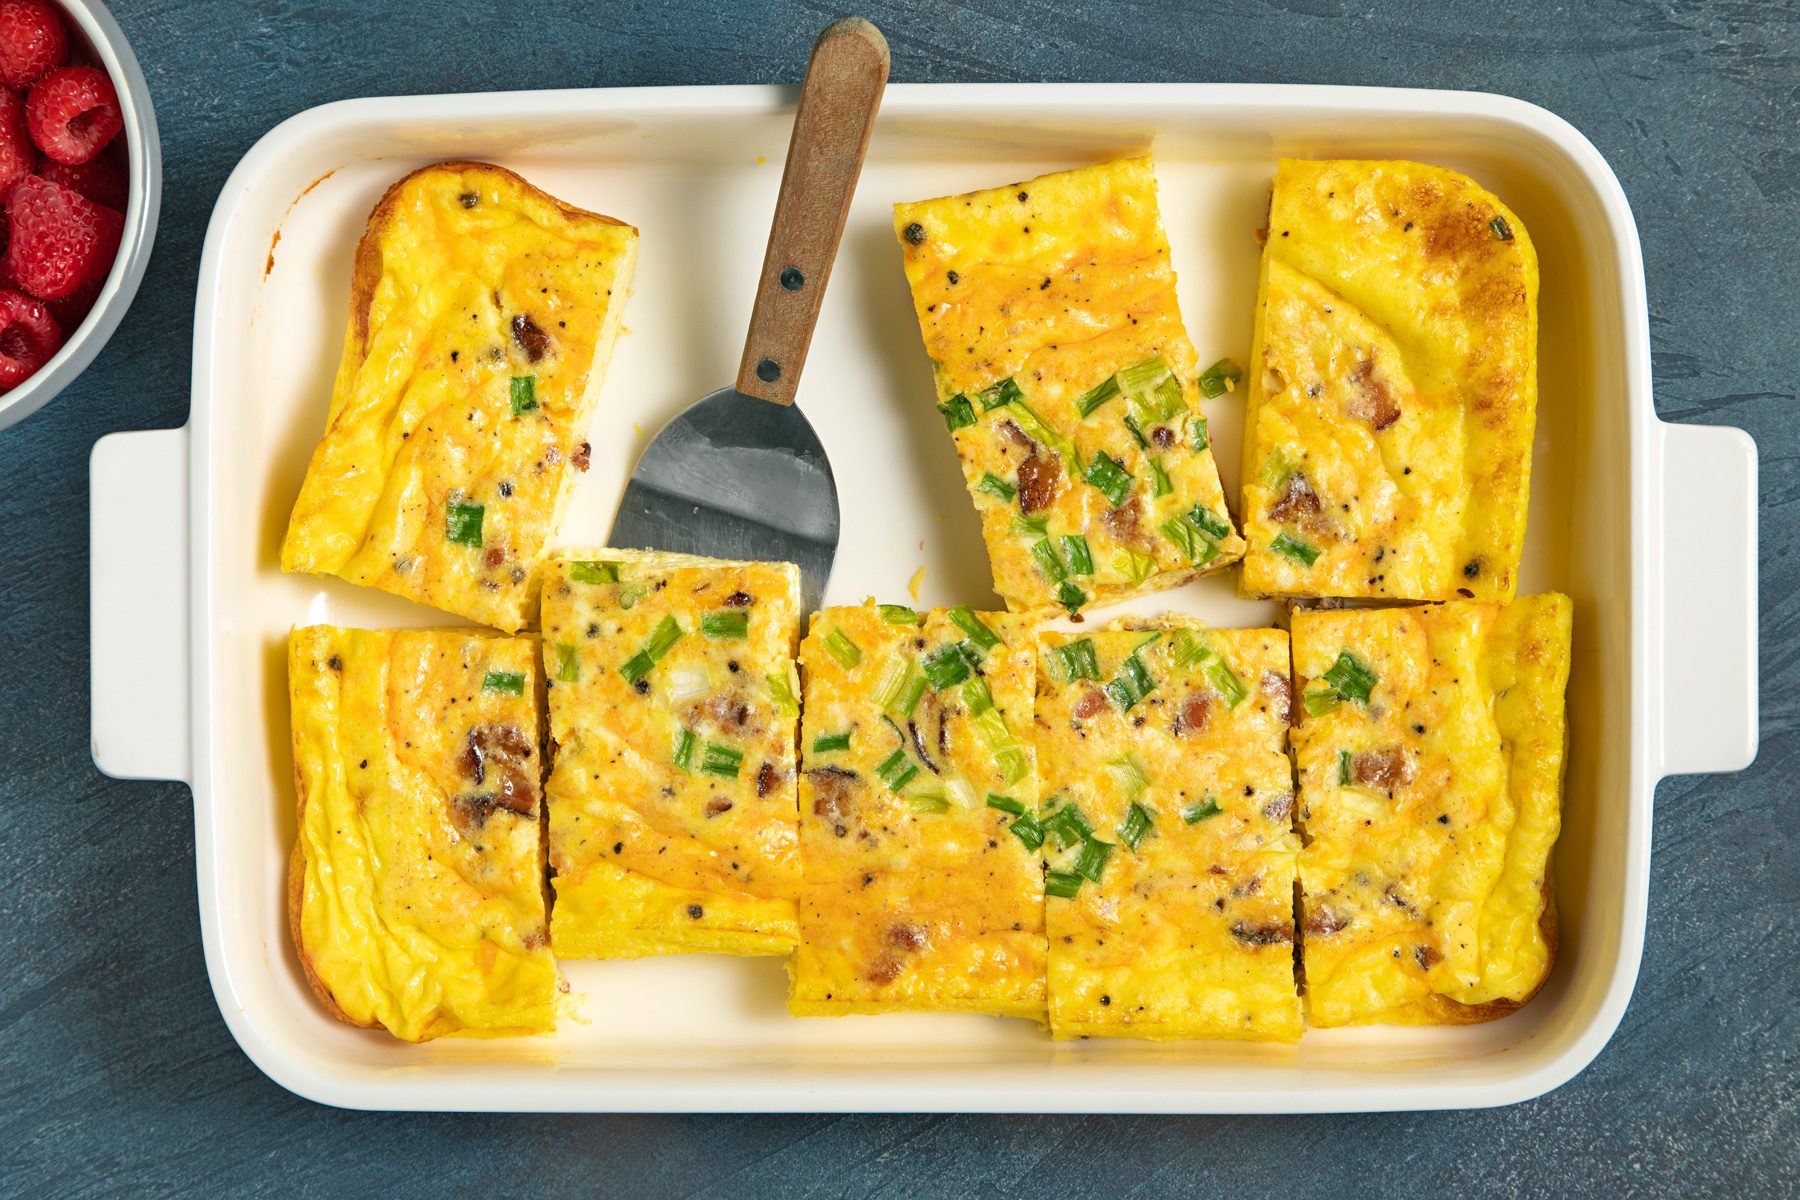 A Baking Tray of Bacon And Egg Casserole